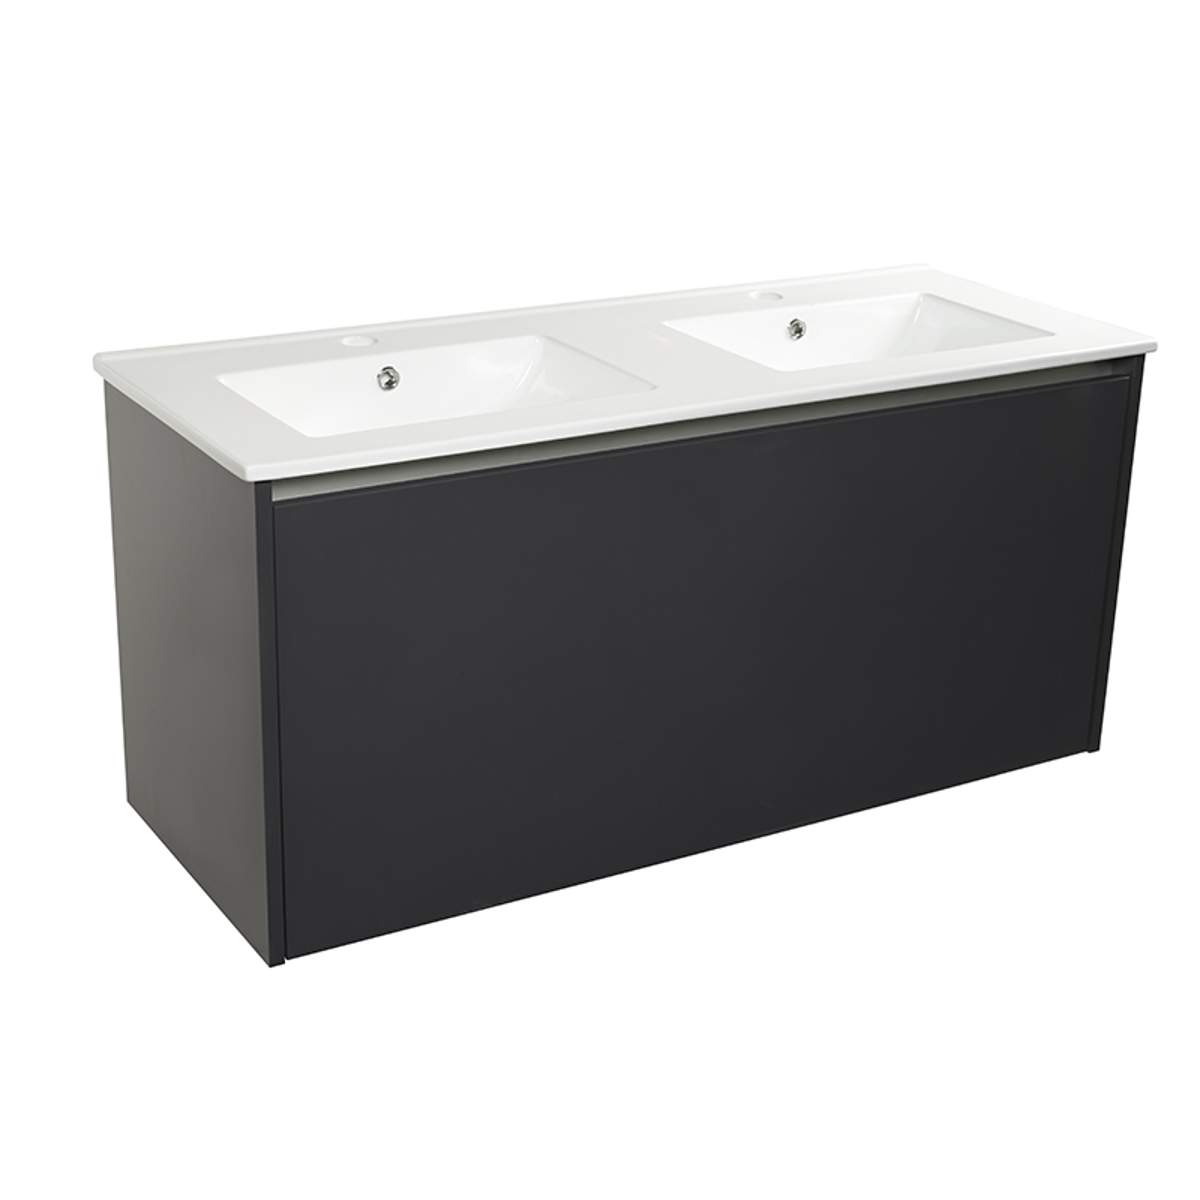 JTP City 1200 Unit with Internal Drawer, Sensor and Bottom Light in Anthracite (CYWM1203AN+CY1200BS)